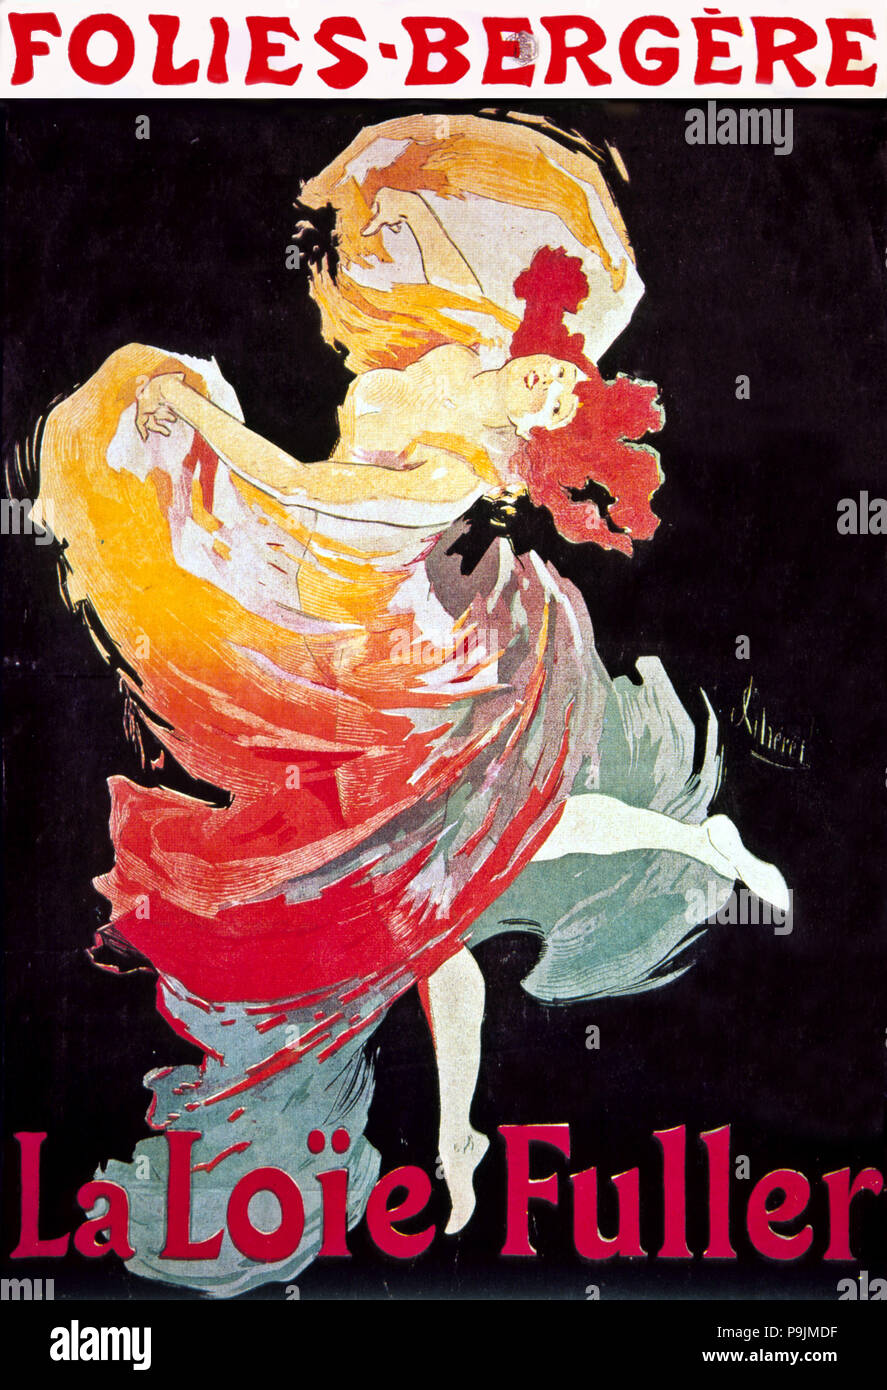 Poster For The Show La Loie Fuller Of The Folies Bergere 15 By Georges Neunier Stock Photo Alamy